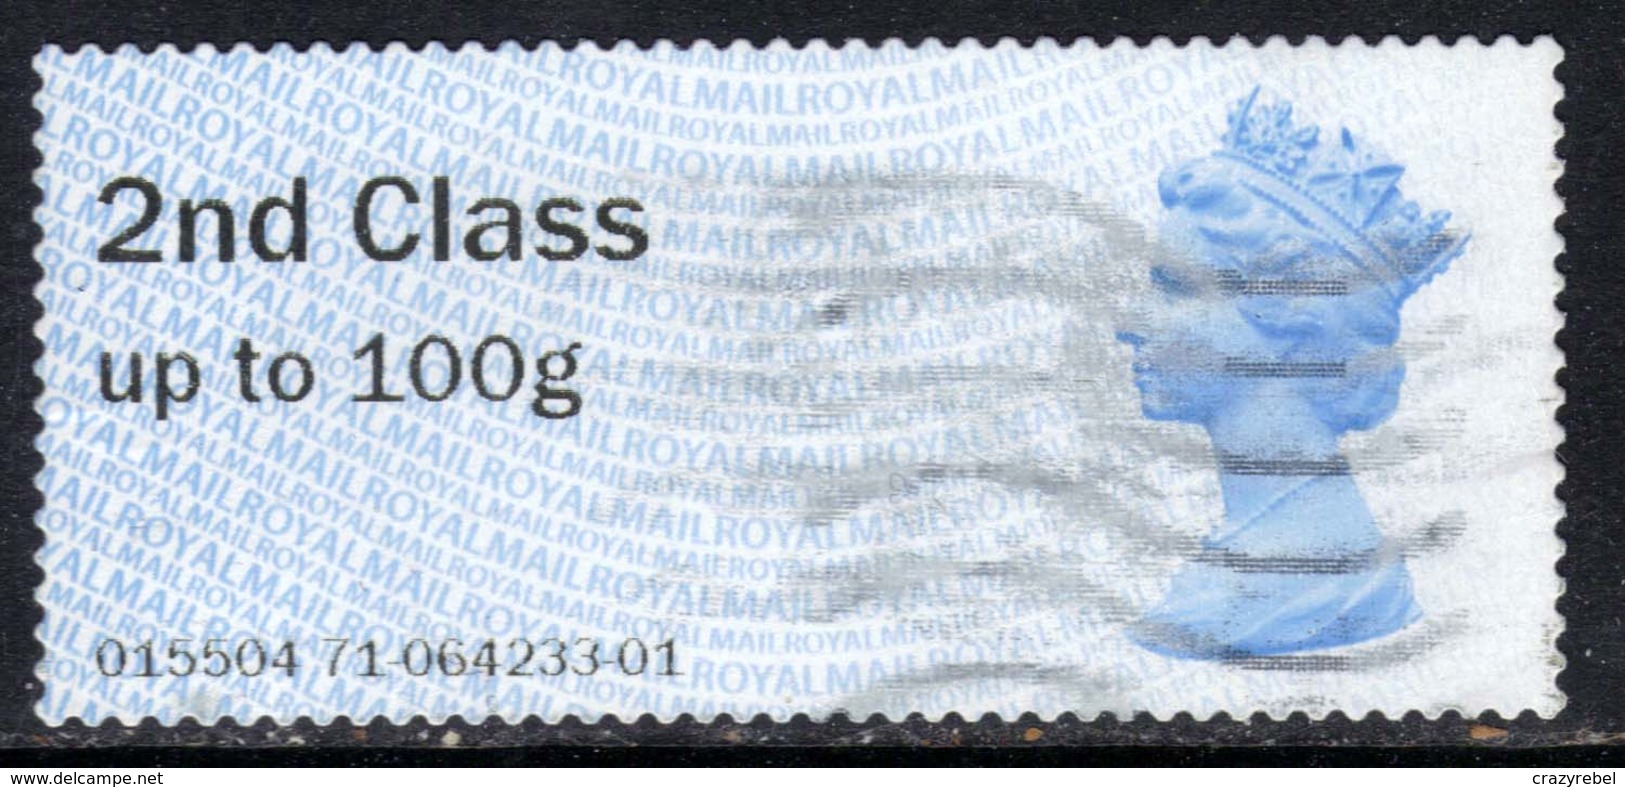 GB 2014 QE2 2nd Class Up To 100gms Post & Go ( A900 ) - Post & Go Stamps